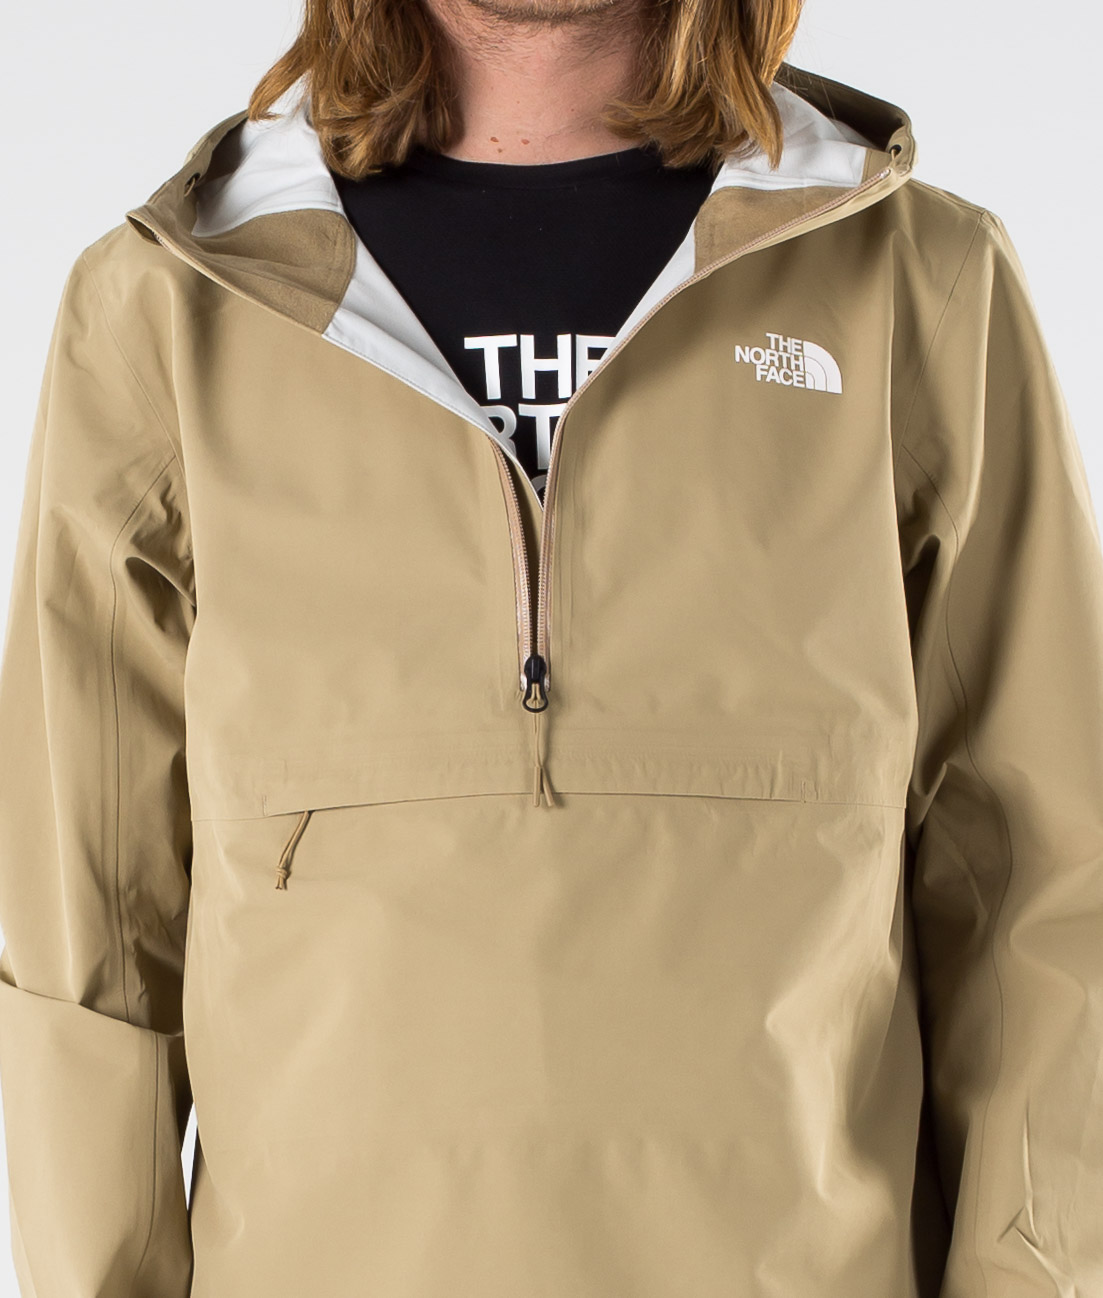 north face active jacket